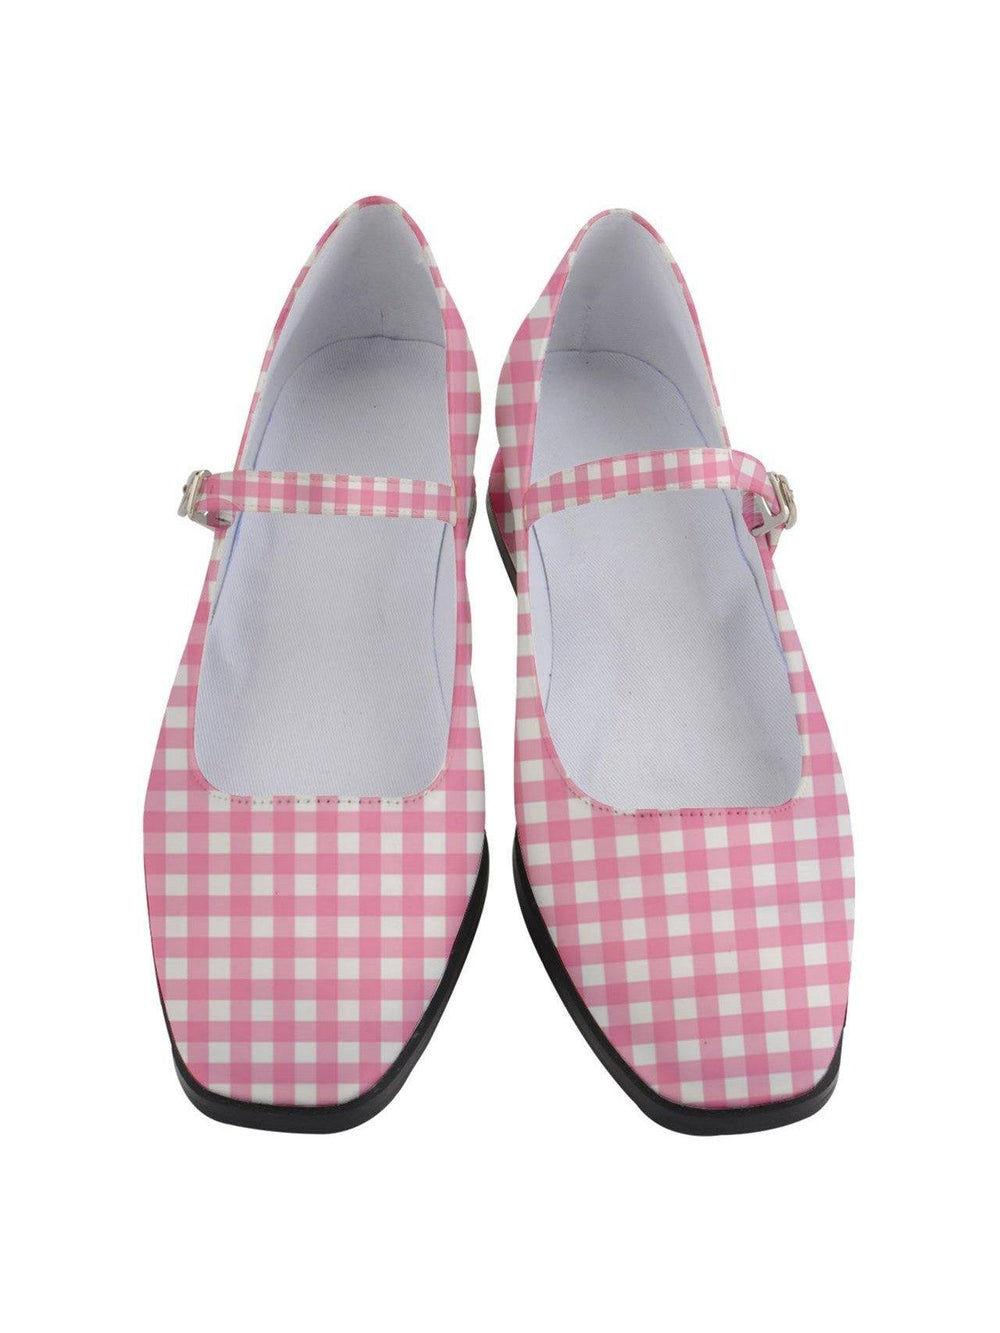 Ellie May Women's Mary Jane Shoes [IN STOCK]